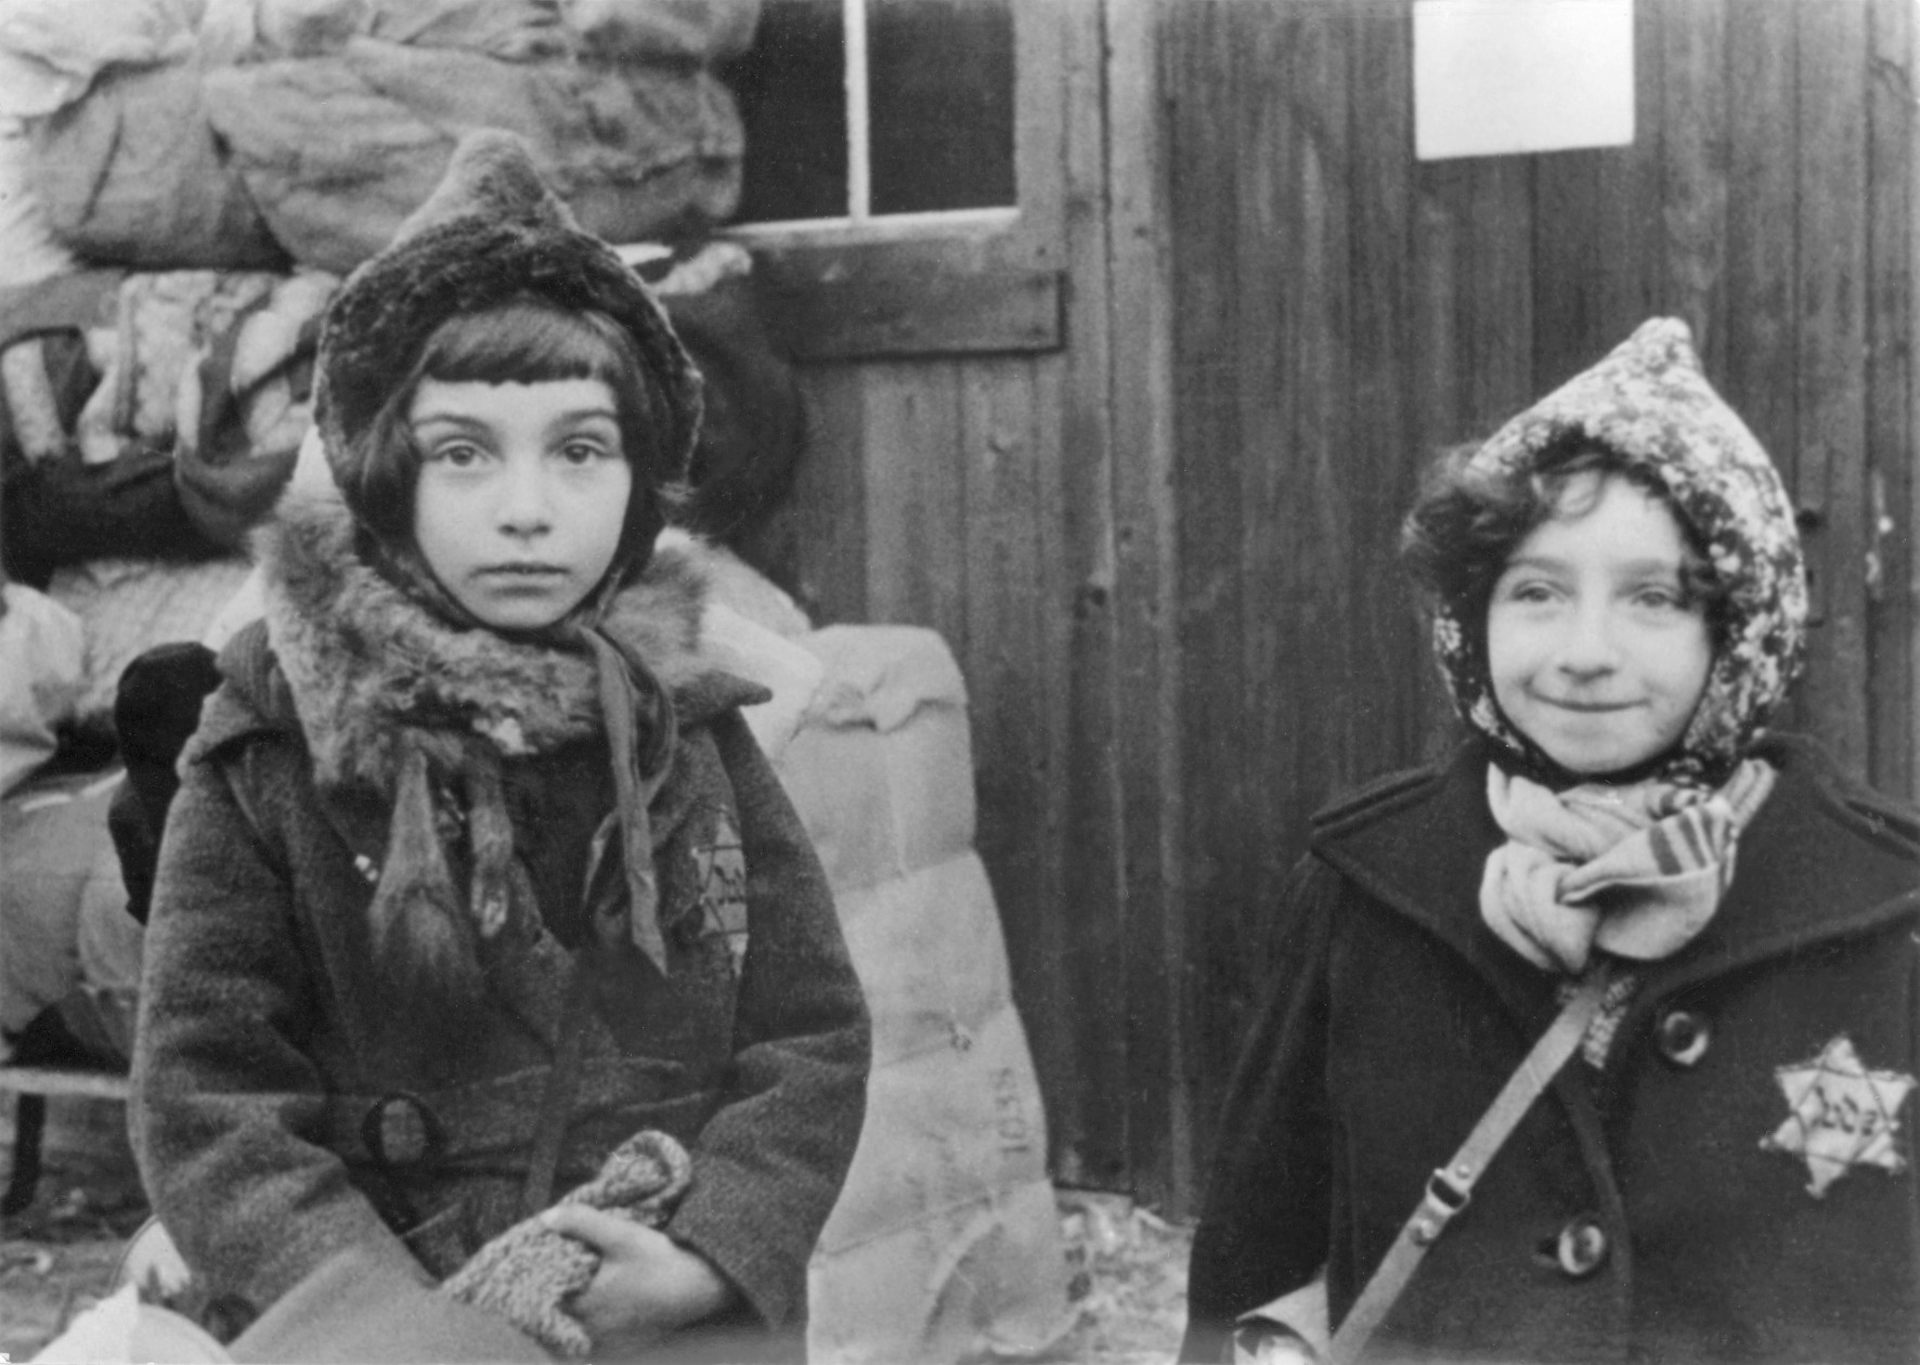 Two young girls in winter coats and hats, both wearing Jewish stars on their coats.